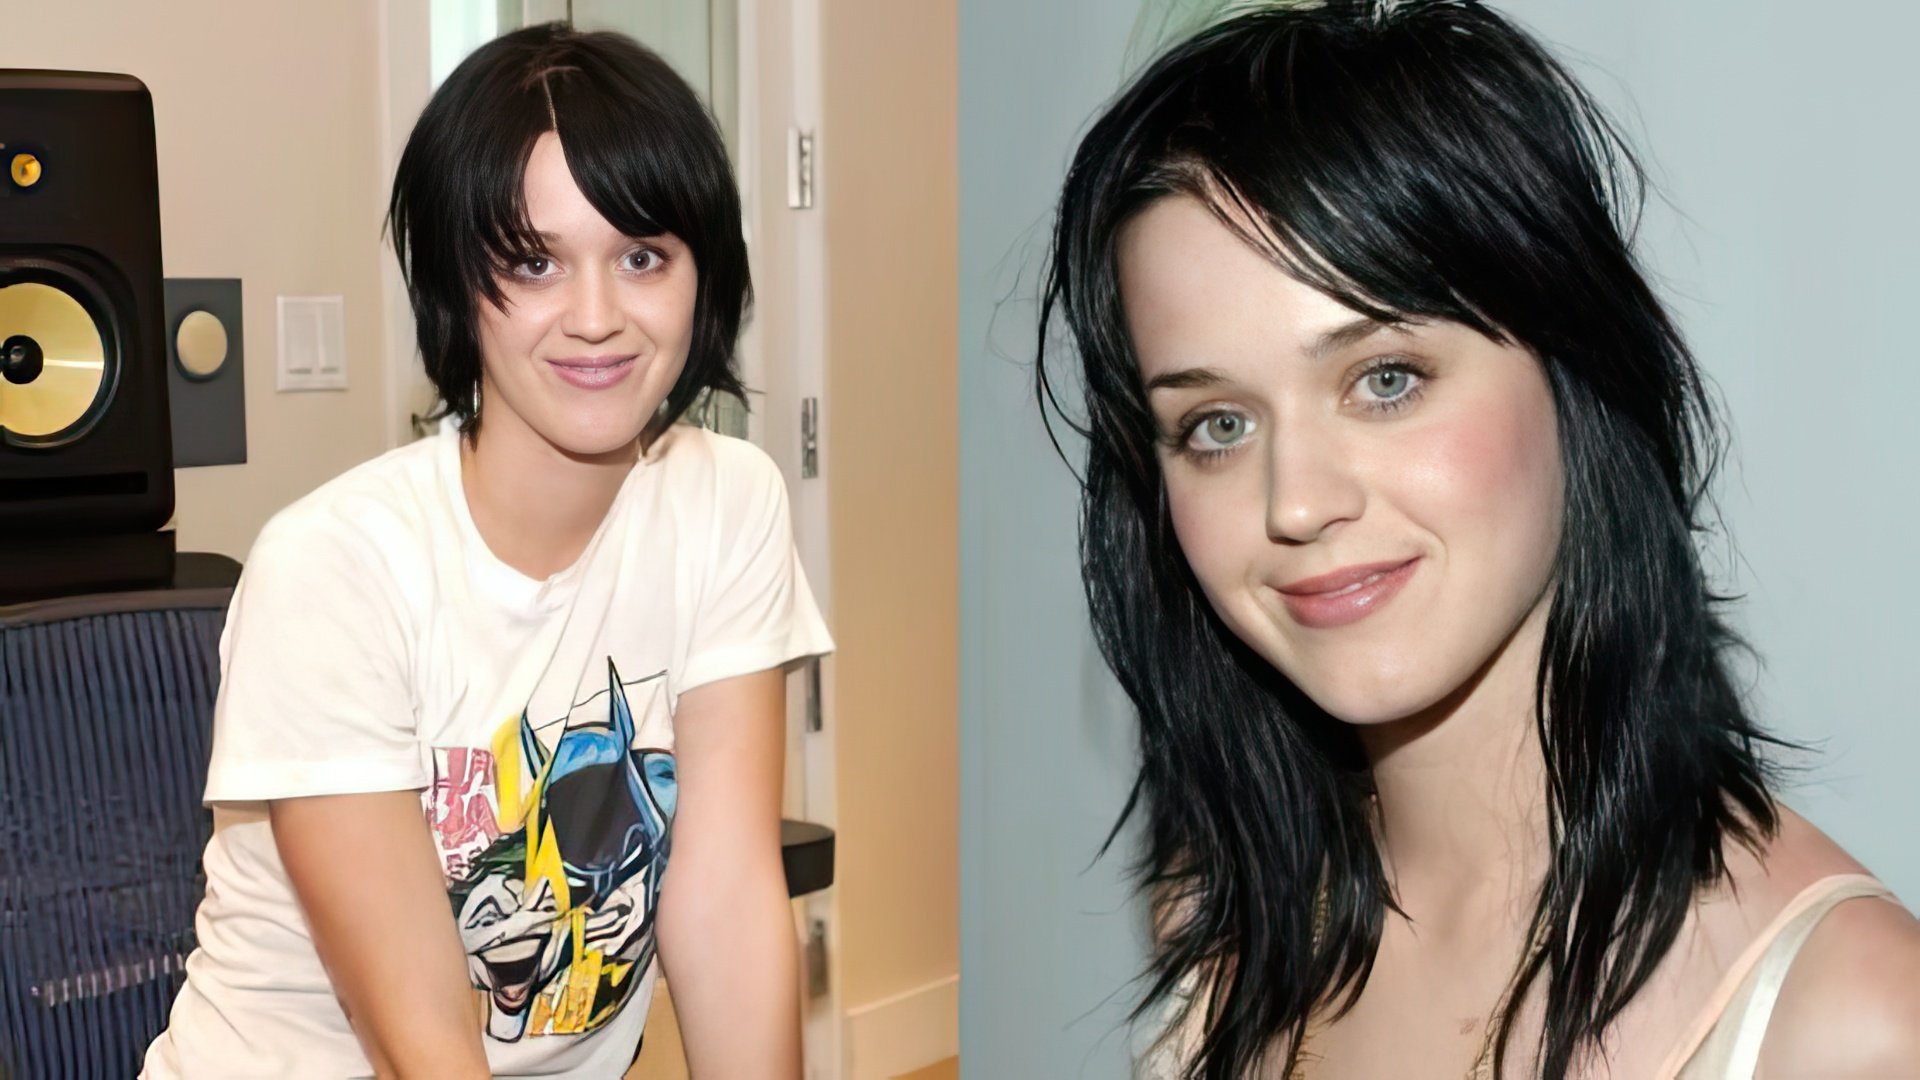 A very young Katy Perry